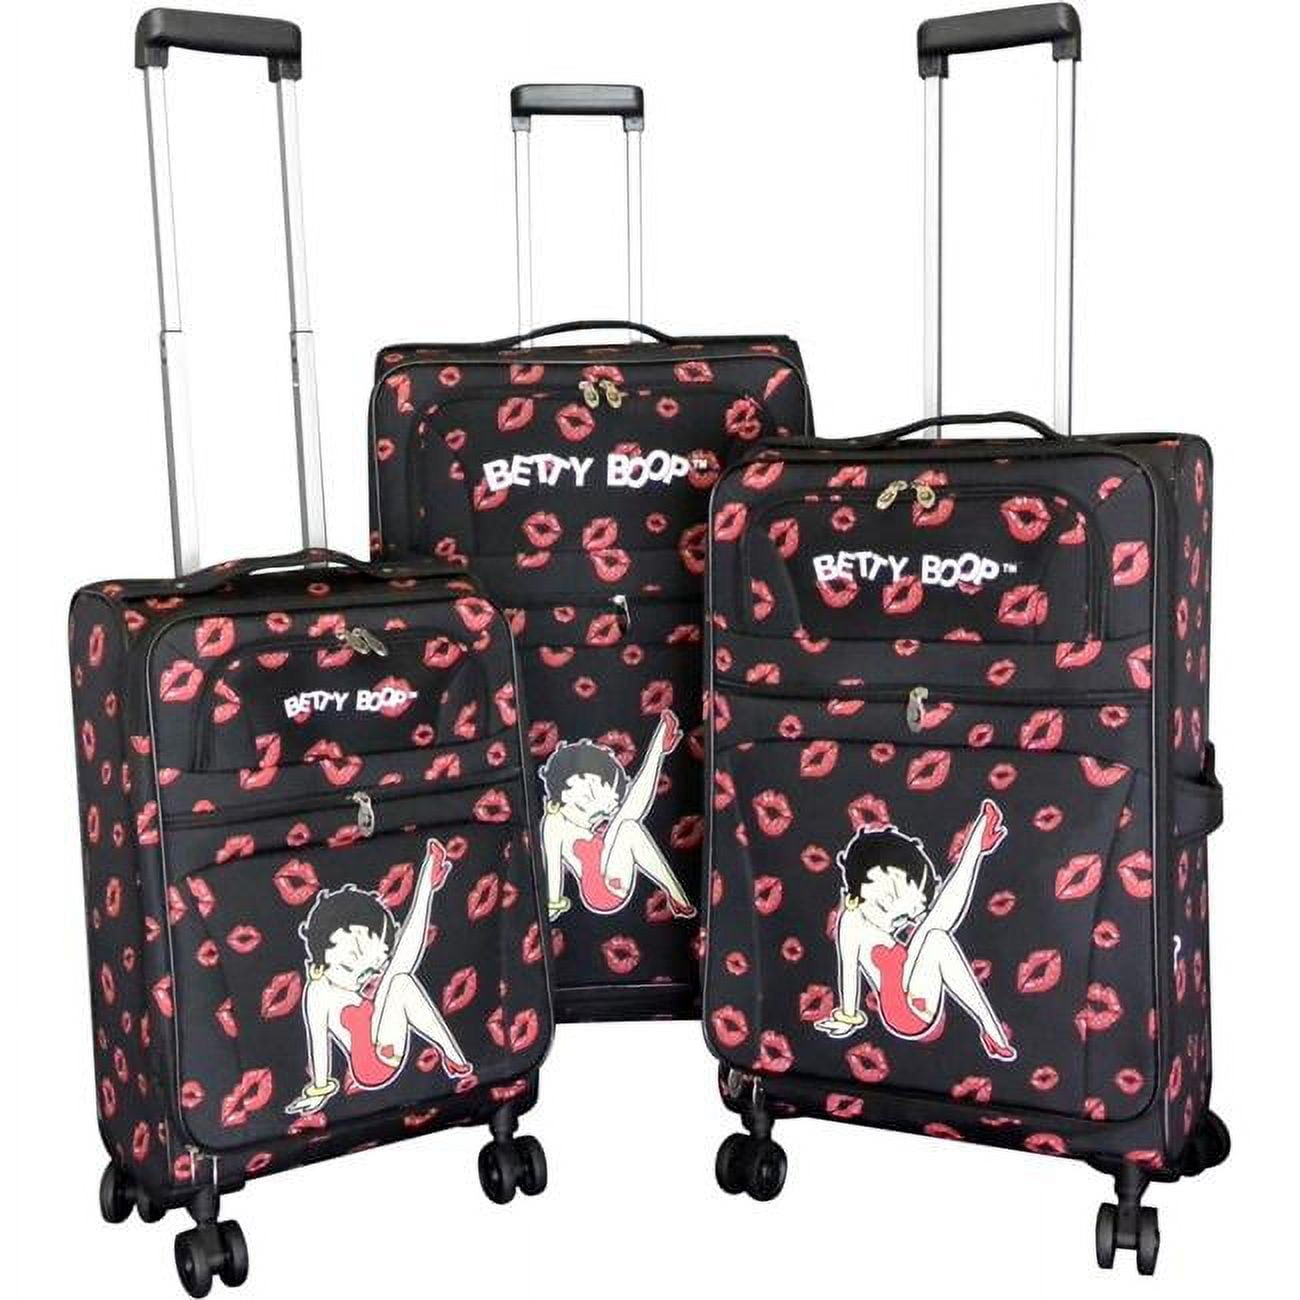 Bn001613-7b Expandable Spinner Luggage Set, Black - 3 Piece